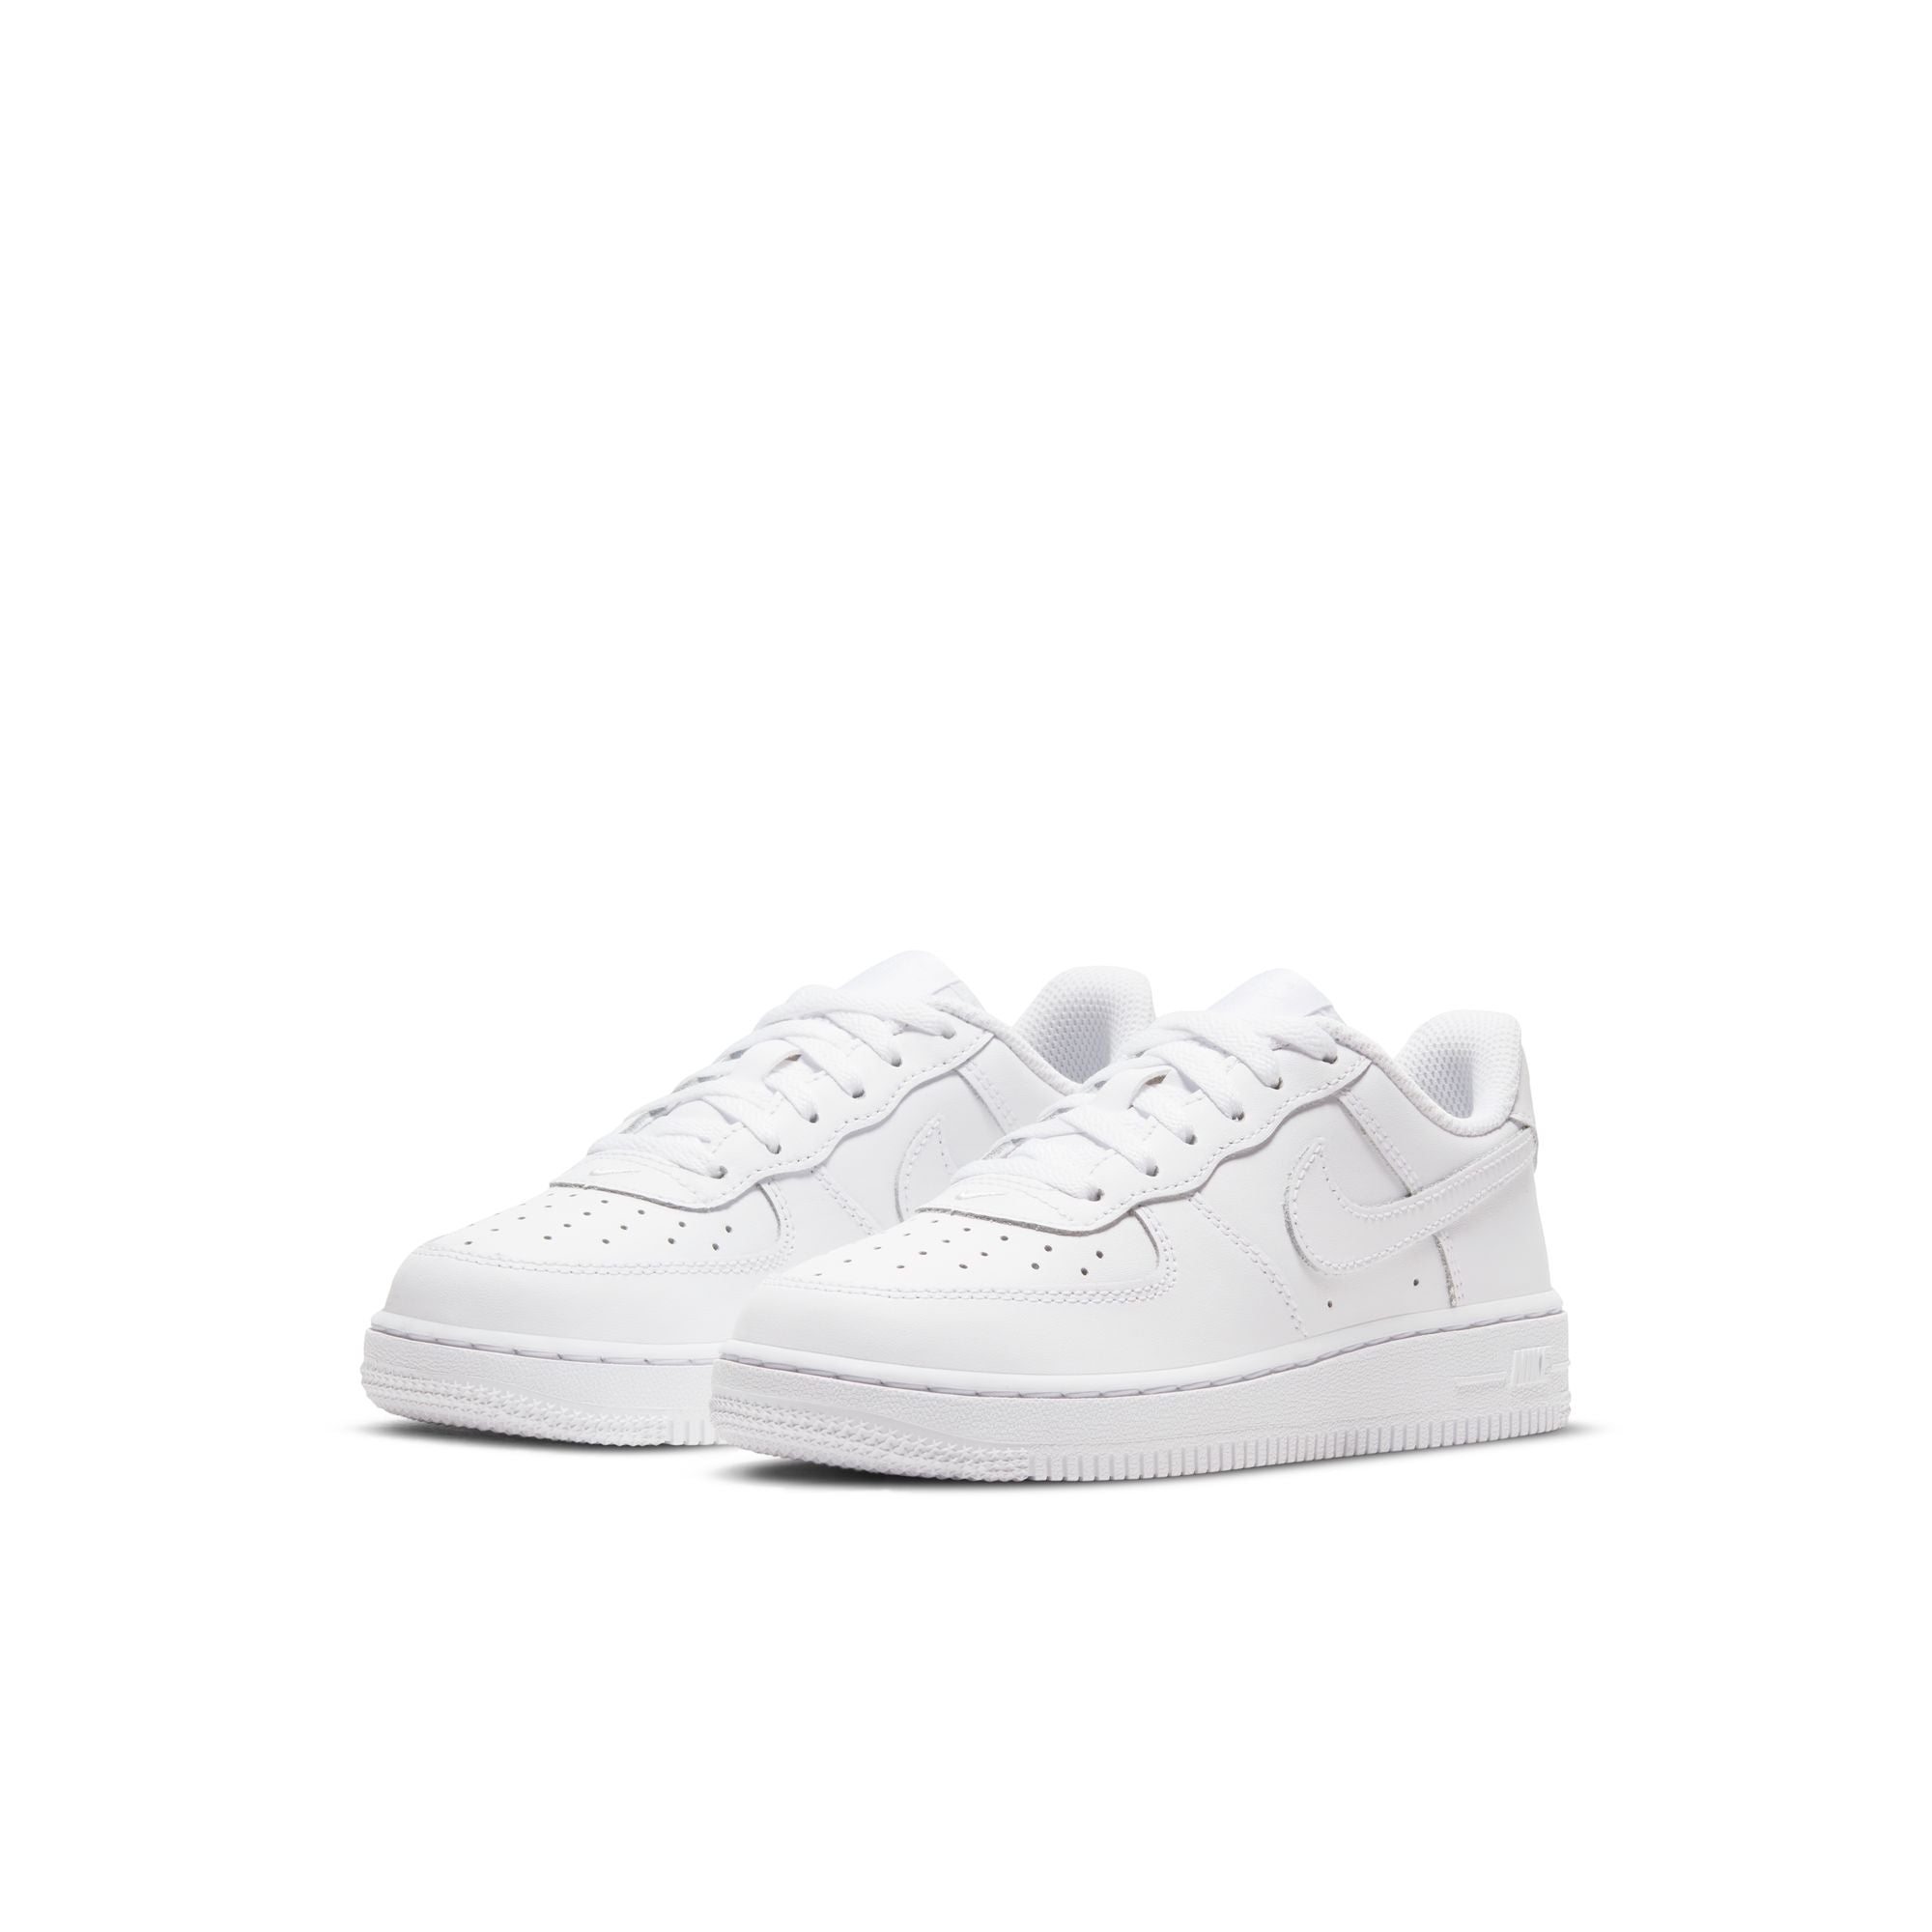 NIKE FORCE 1 LE (PS)